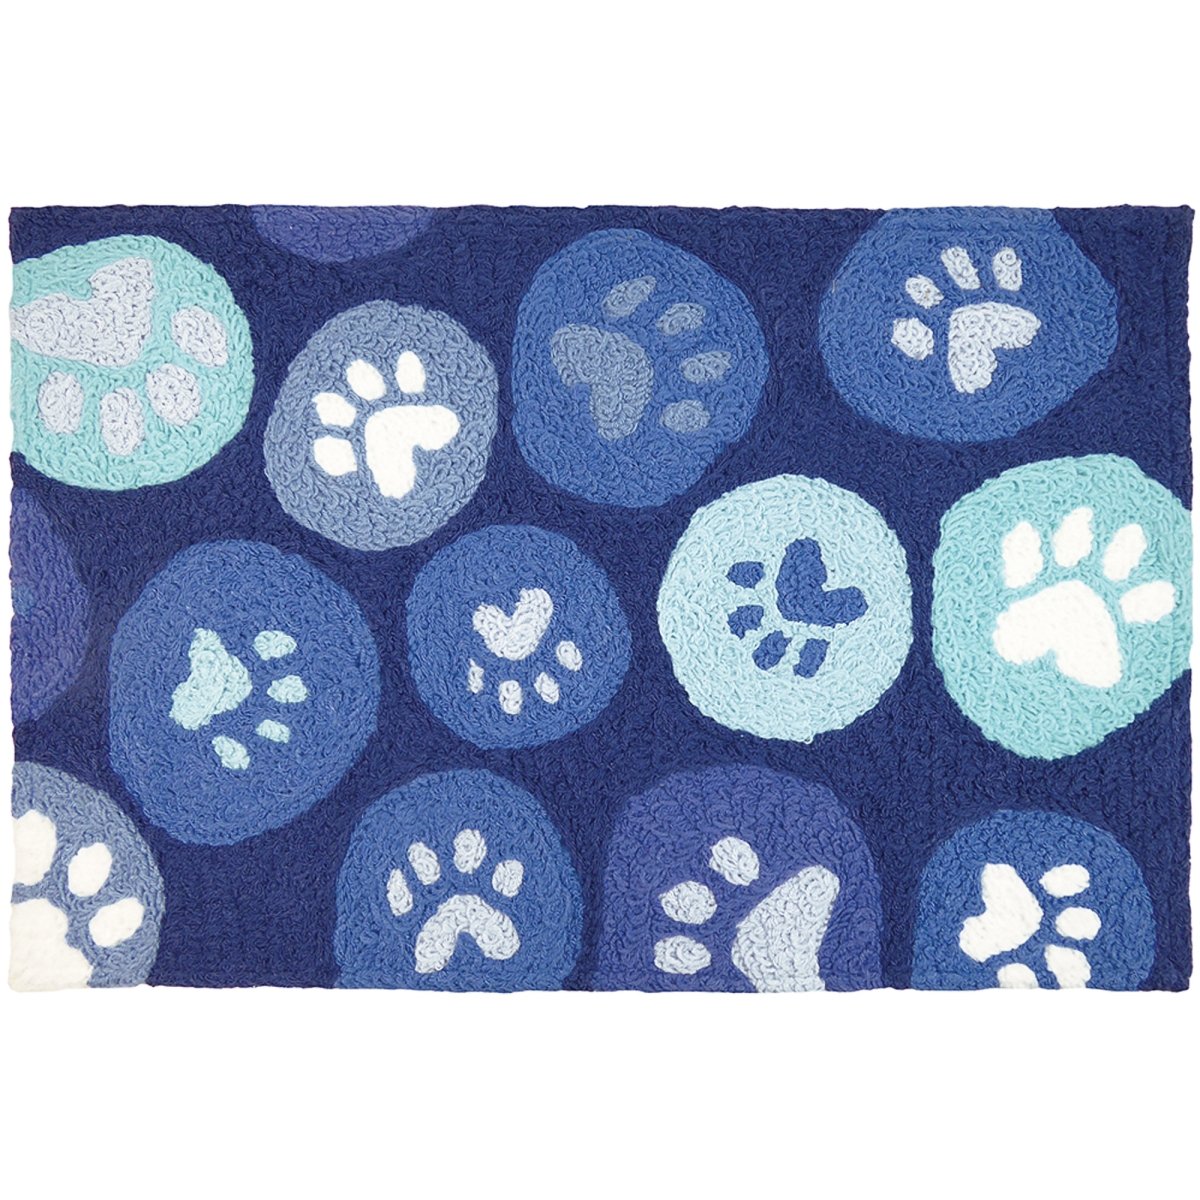 Jb-kr010 20 X 30 In. Paws Galore Blue Rug